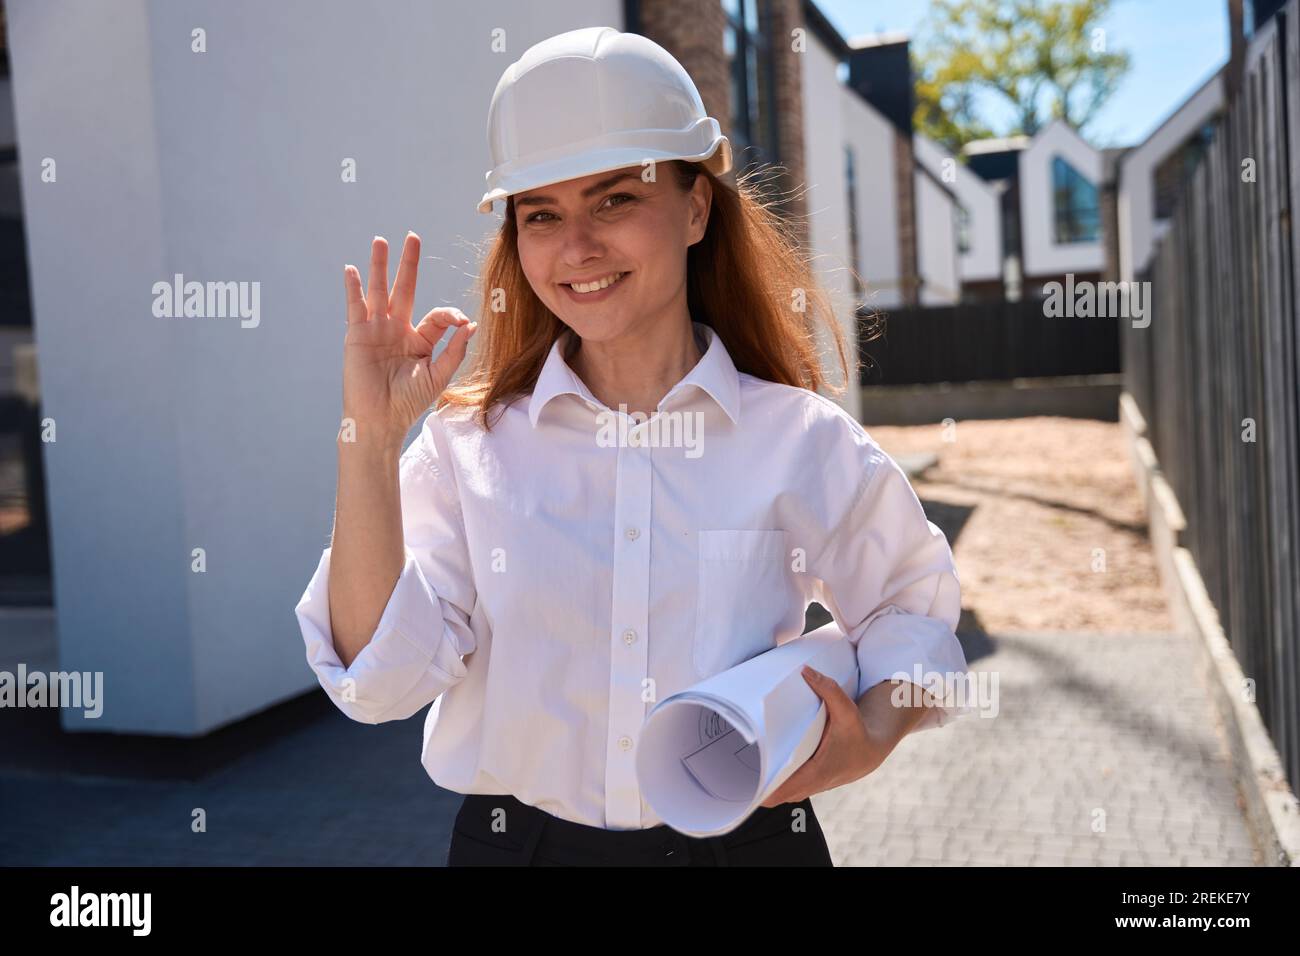 Woman architect with blueprints in hands and hardhat showing ok sign Stock Photo